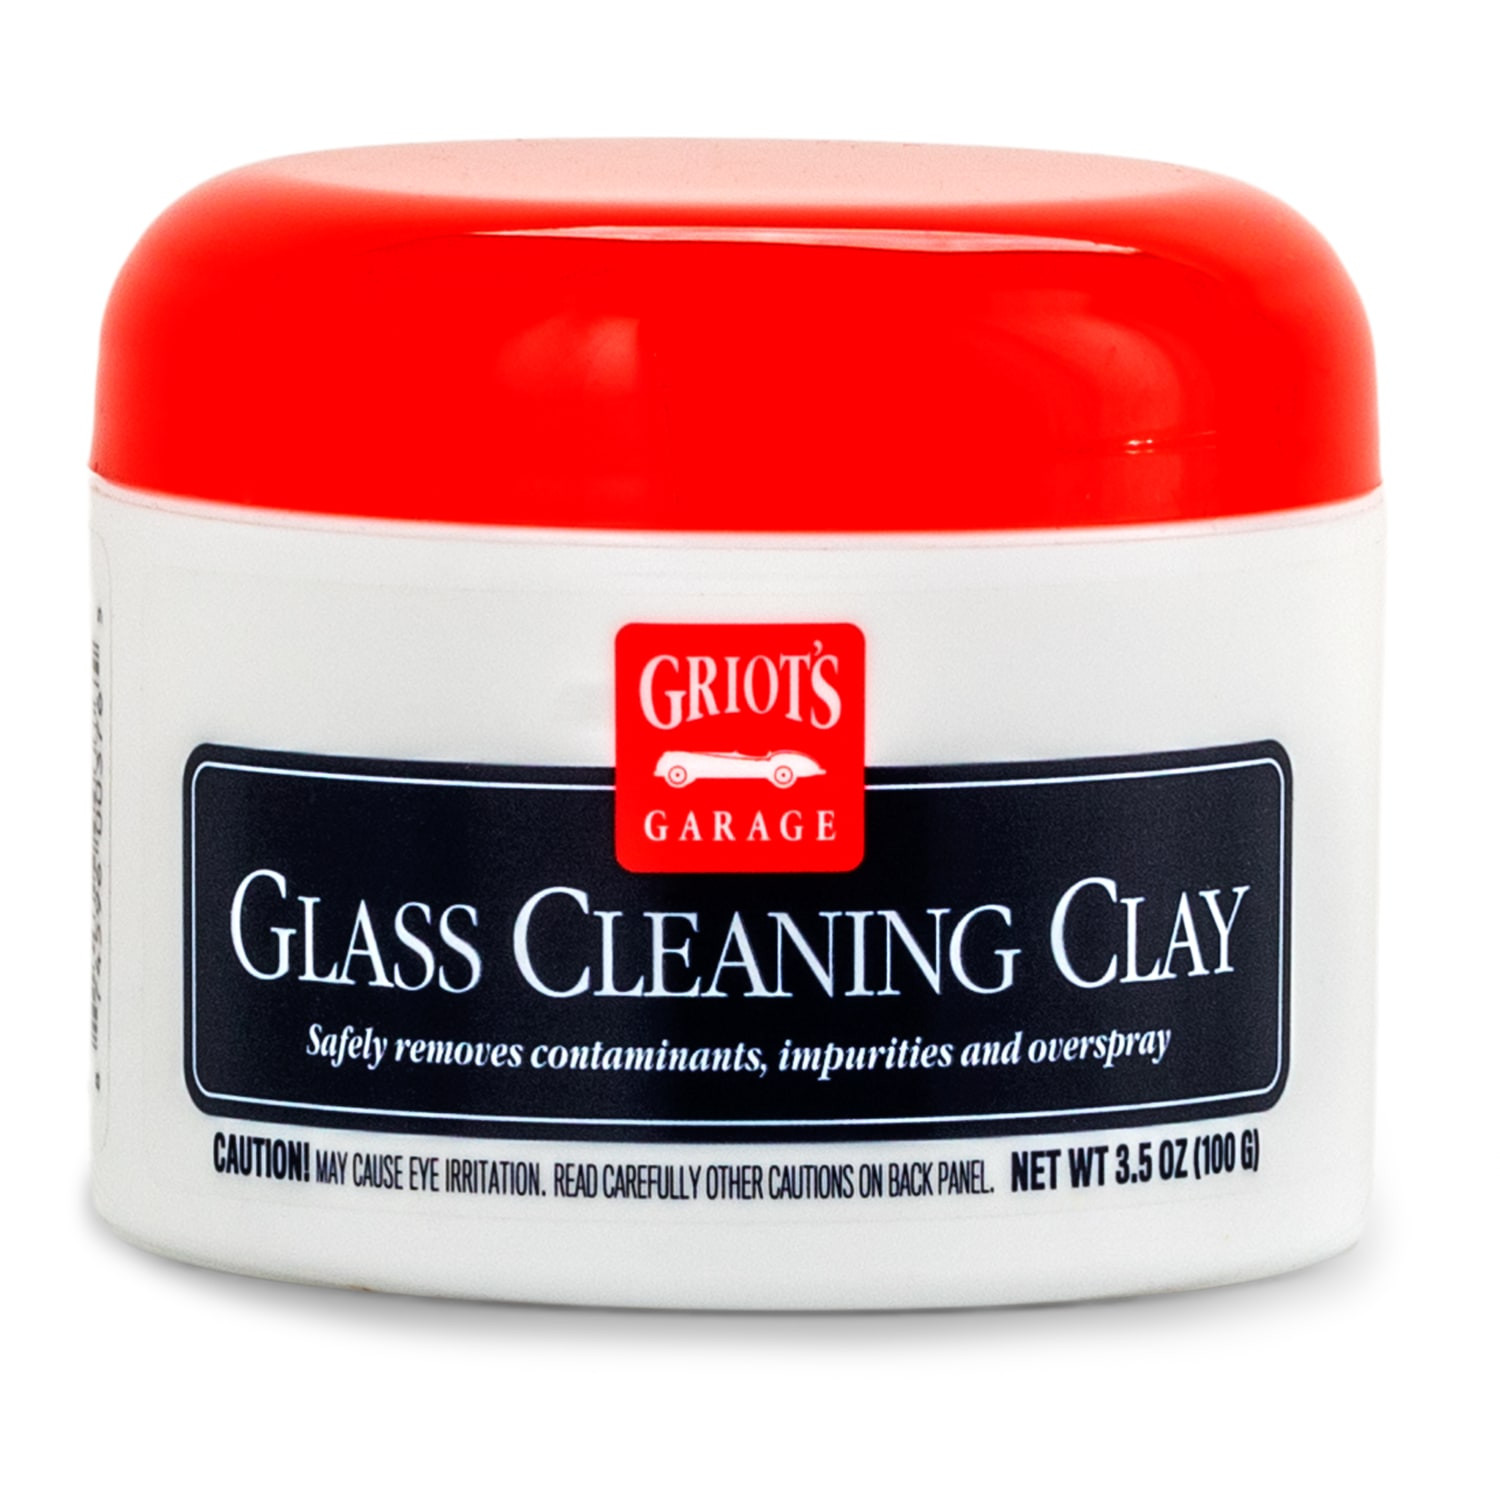 Griot's Glass Sealant